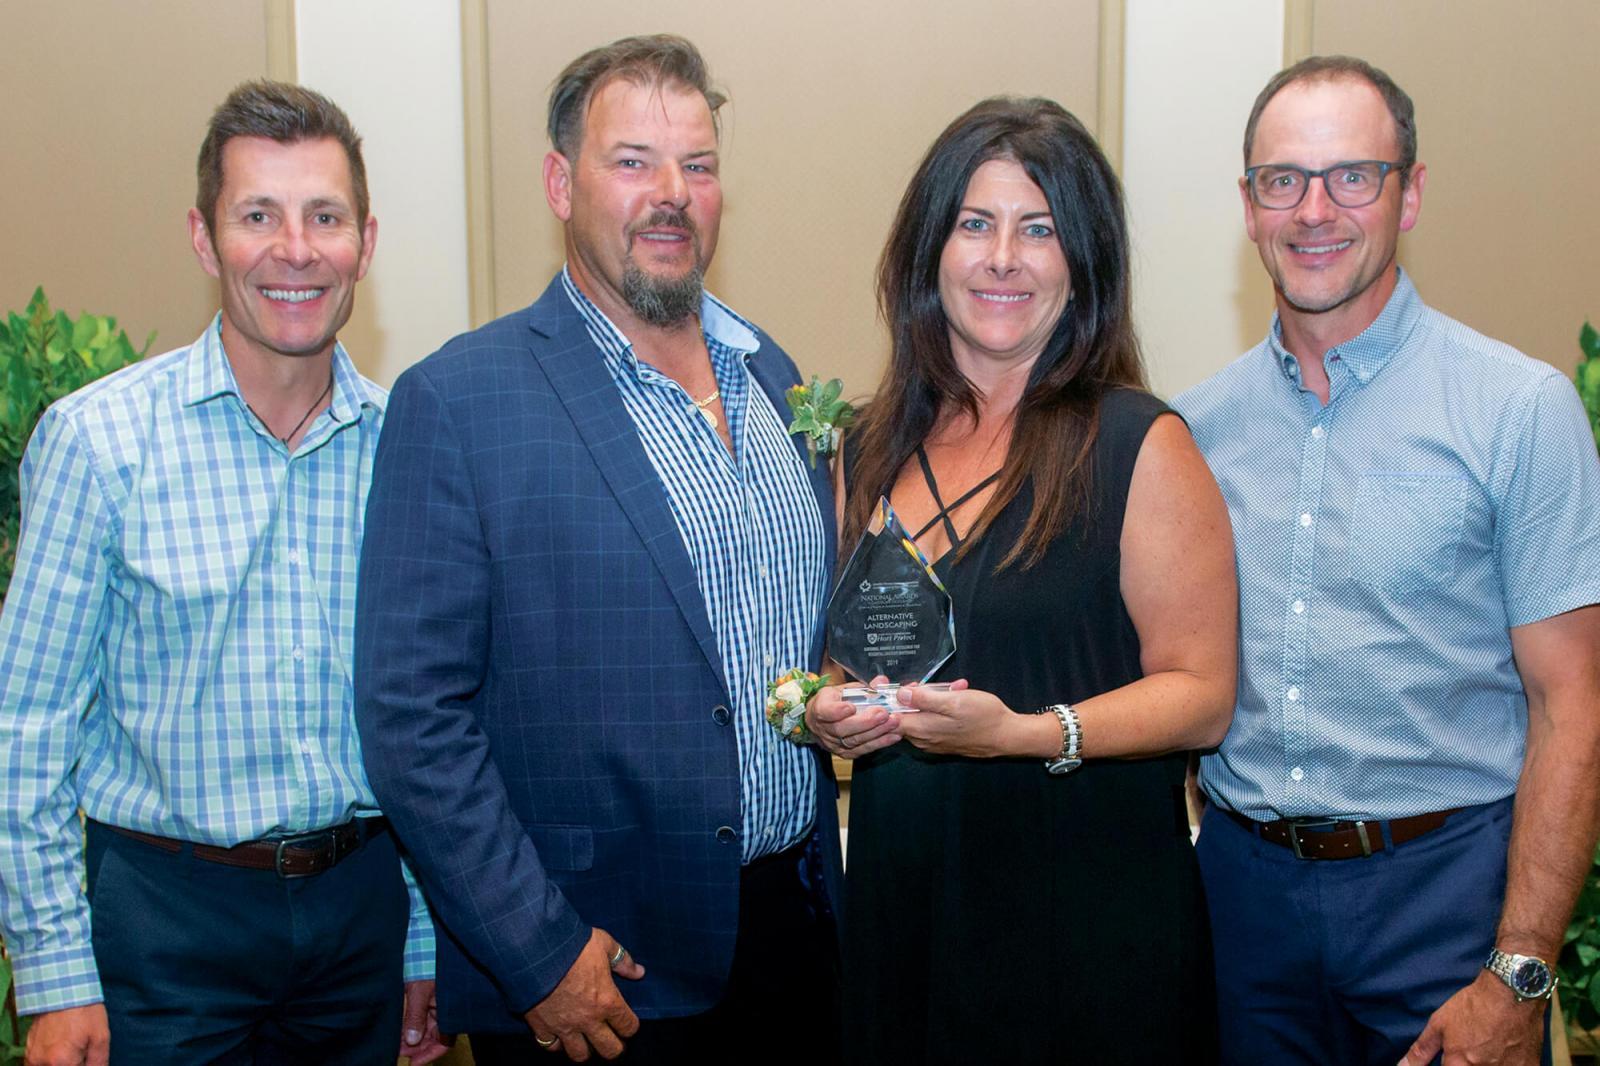 Chris and Karen Griffin of Alternative Landscaping received national recognition for residential maintenance at the CNLA awards gala held recently in B.C. They were joined by Rob Officer, left, and Guy Dowhy at right.